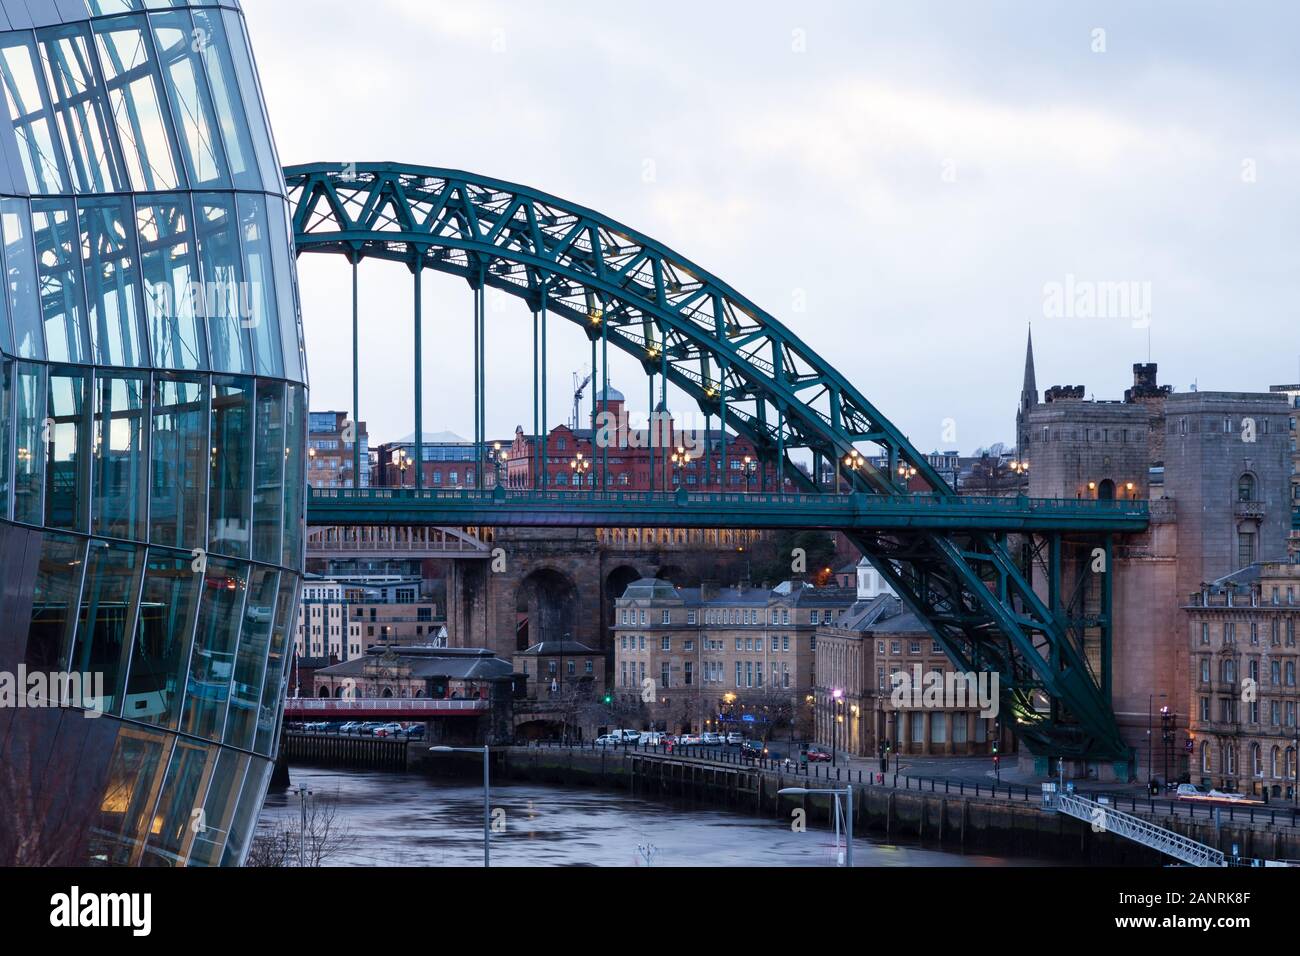 An evening view past the Sage towards the Tyne Bridge and Newcastle upon Tyne, England.  The bridge spans the River Tyne. Stock Photo